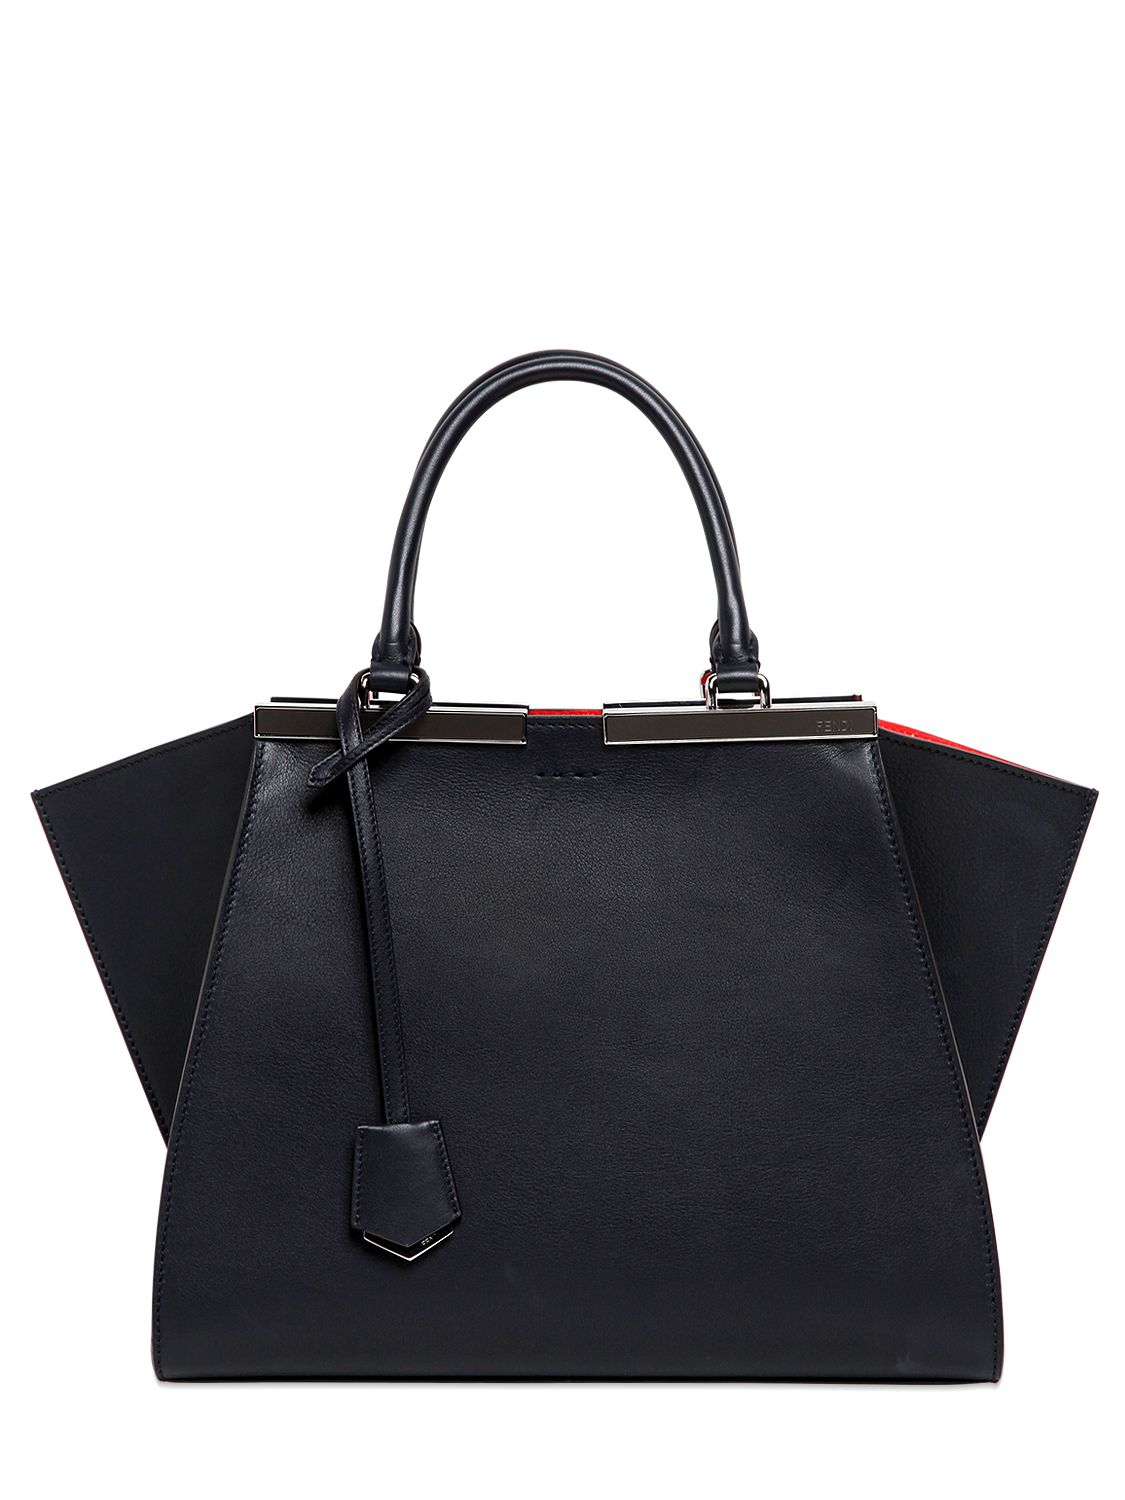 Fendi Mini 3jours Leather Top Handle Bag in Blue (MIDNIGHT BLUE) | Lyst